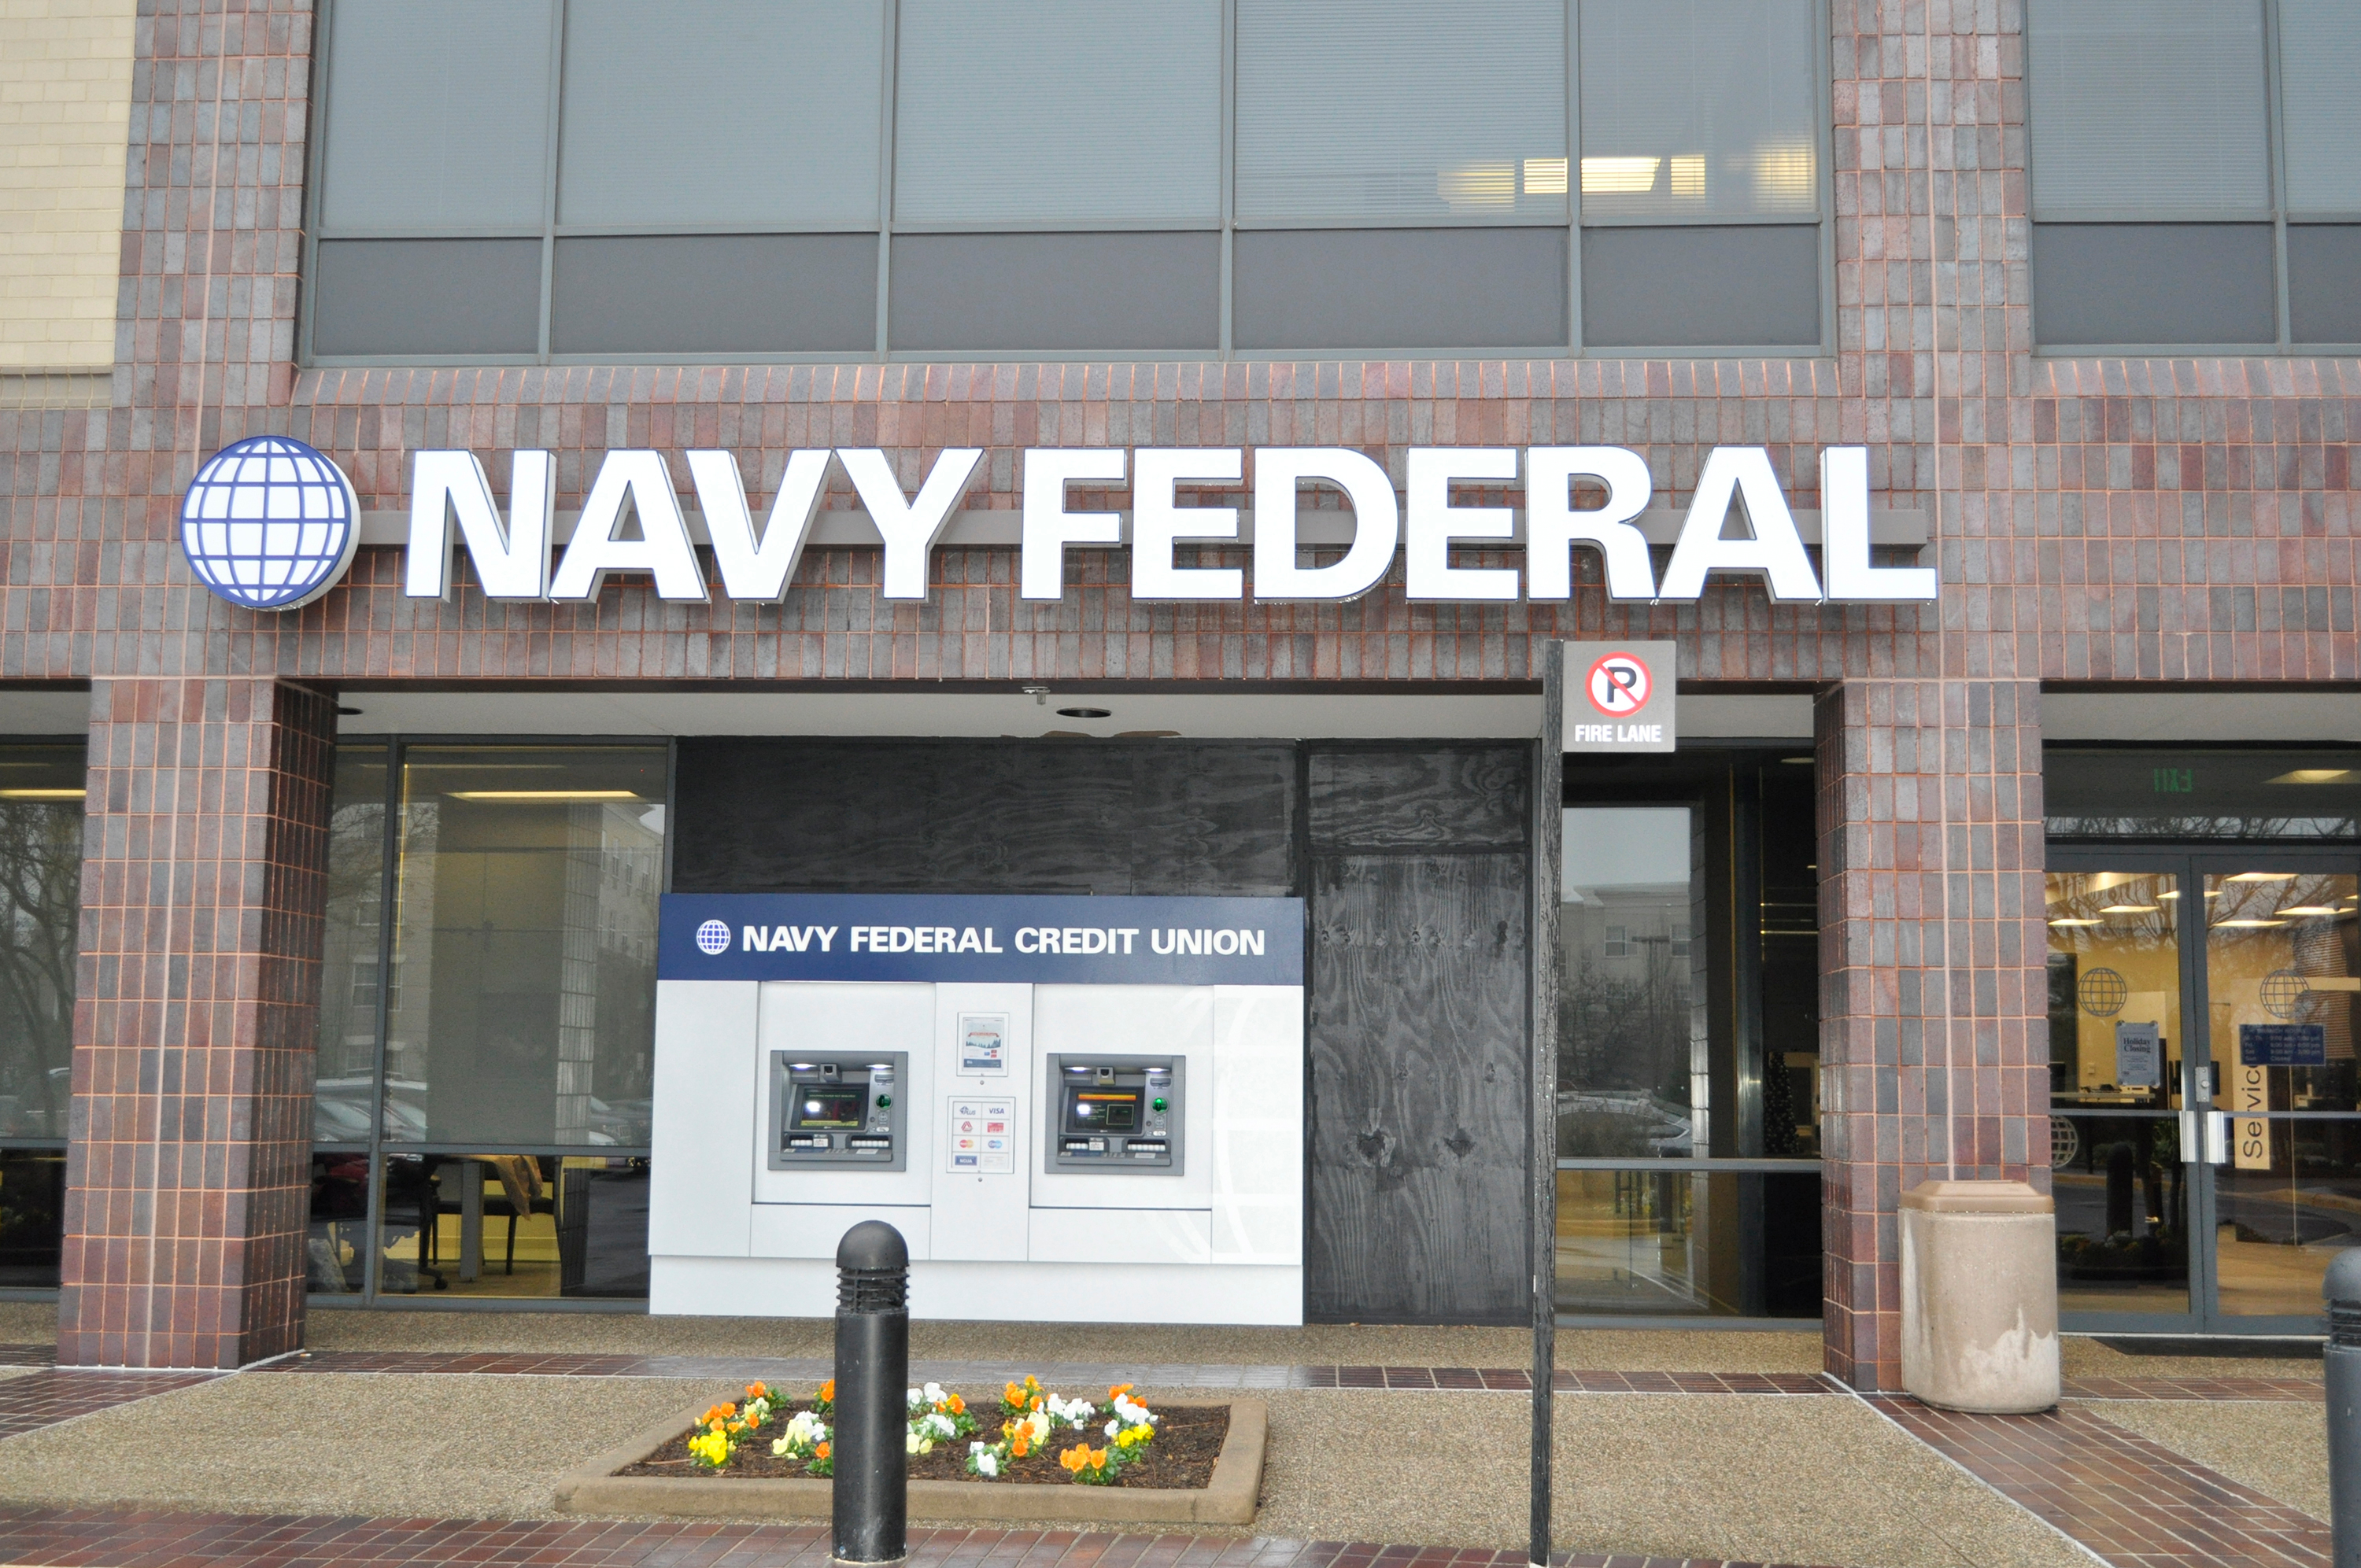 Navy Federal Credit Union Coupons near me in Springfield, VA 22150 | 8coupons